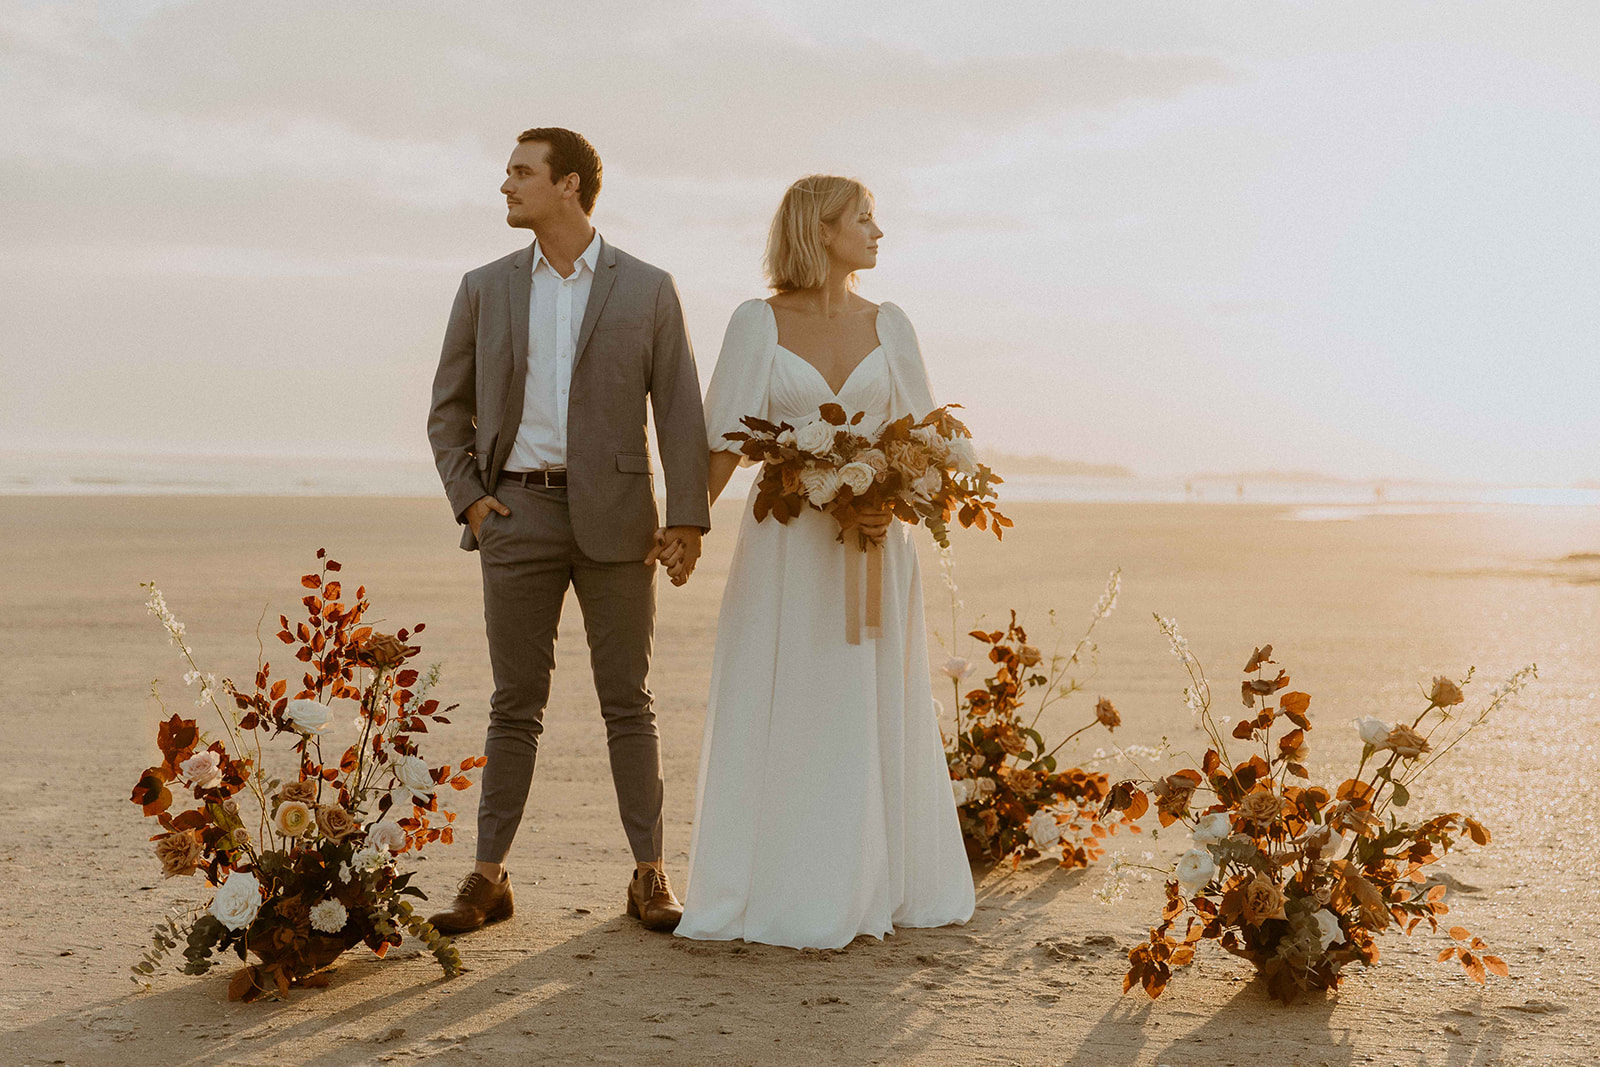 A couple in wedding attire walks on a beach at sunset, with the bride holding her gown and both smiling. Floral arrangements are scattered on the sand behind them at their georgia elopement location